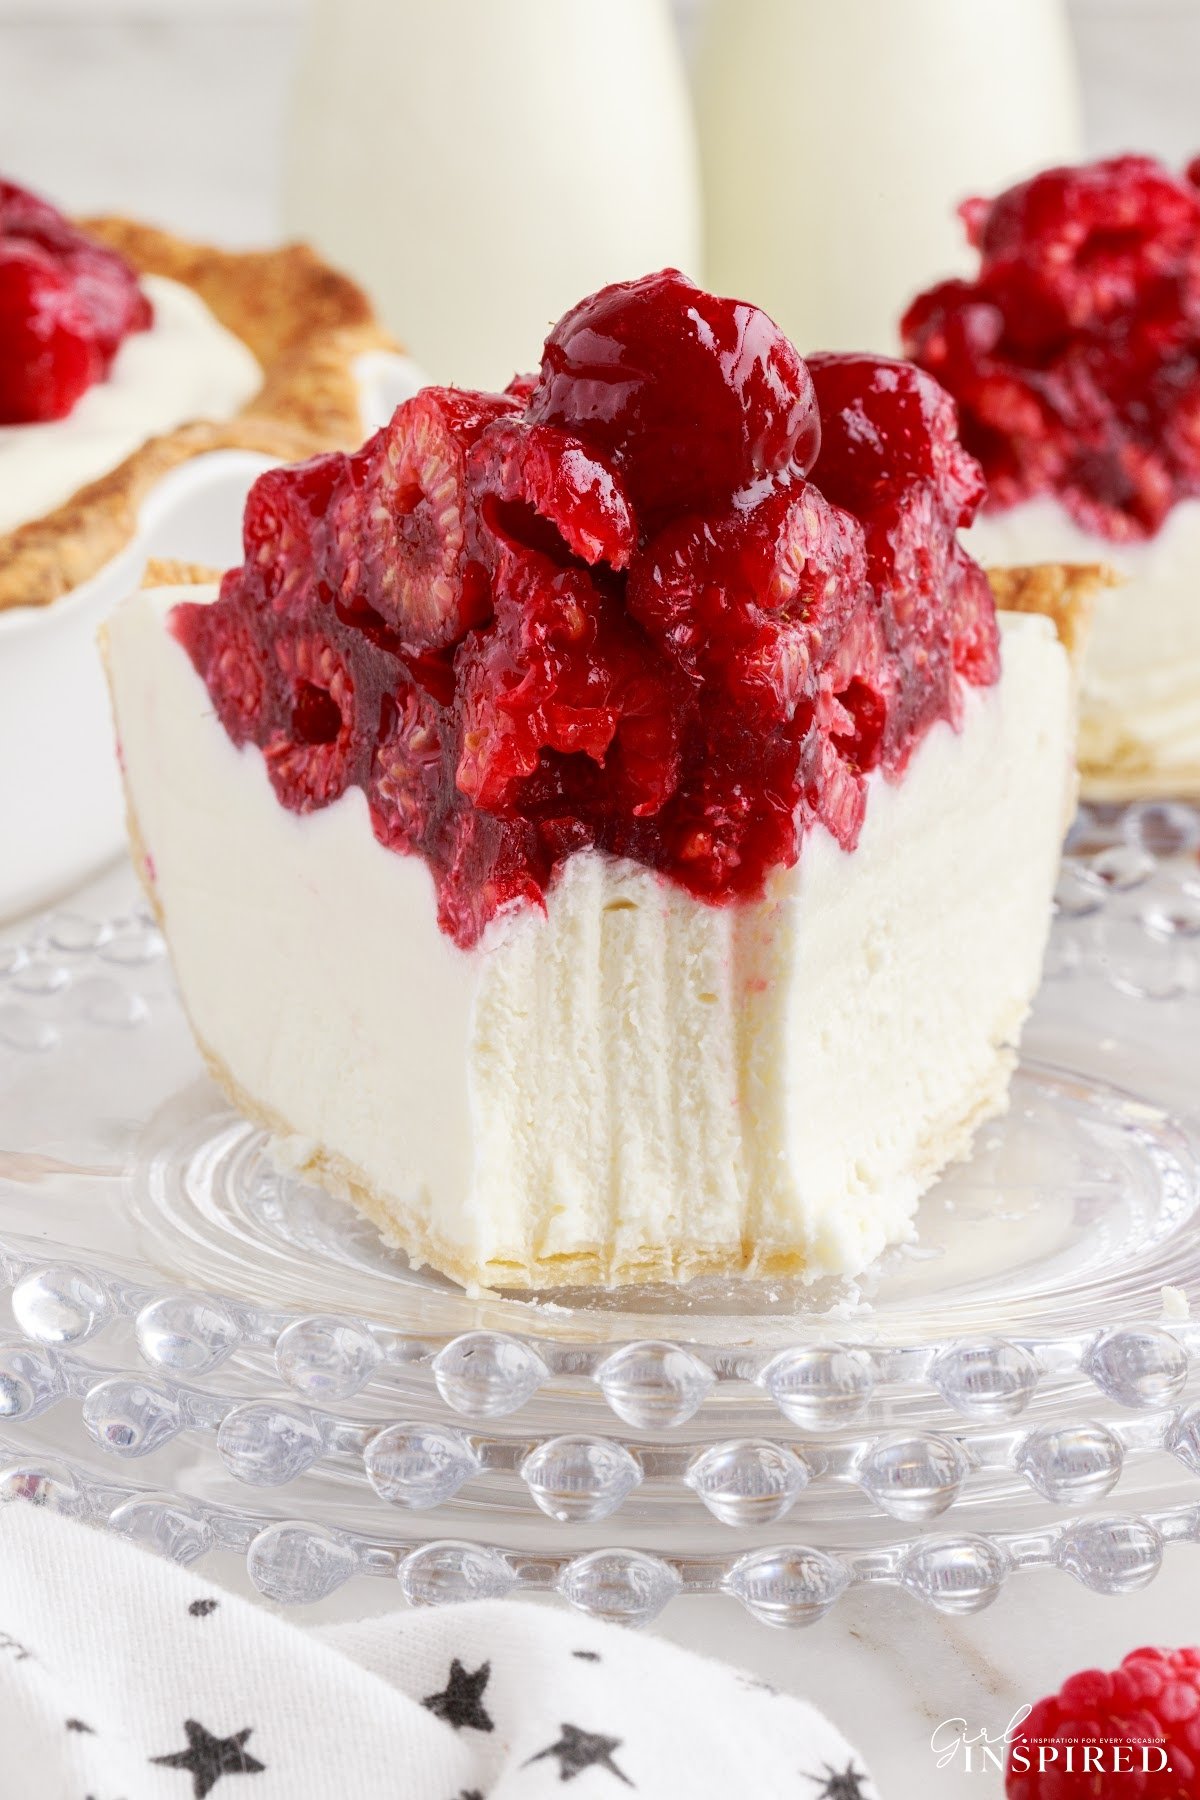 A slice of Raspberry Cream Cheese Pie on a plate with a fork mark taking out.